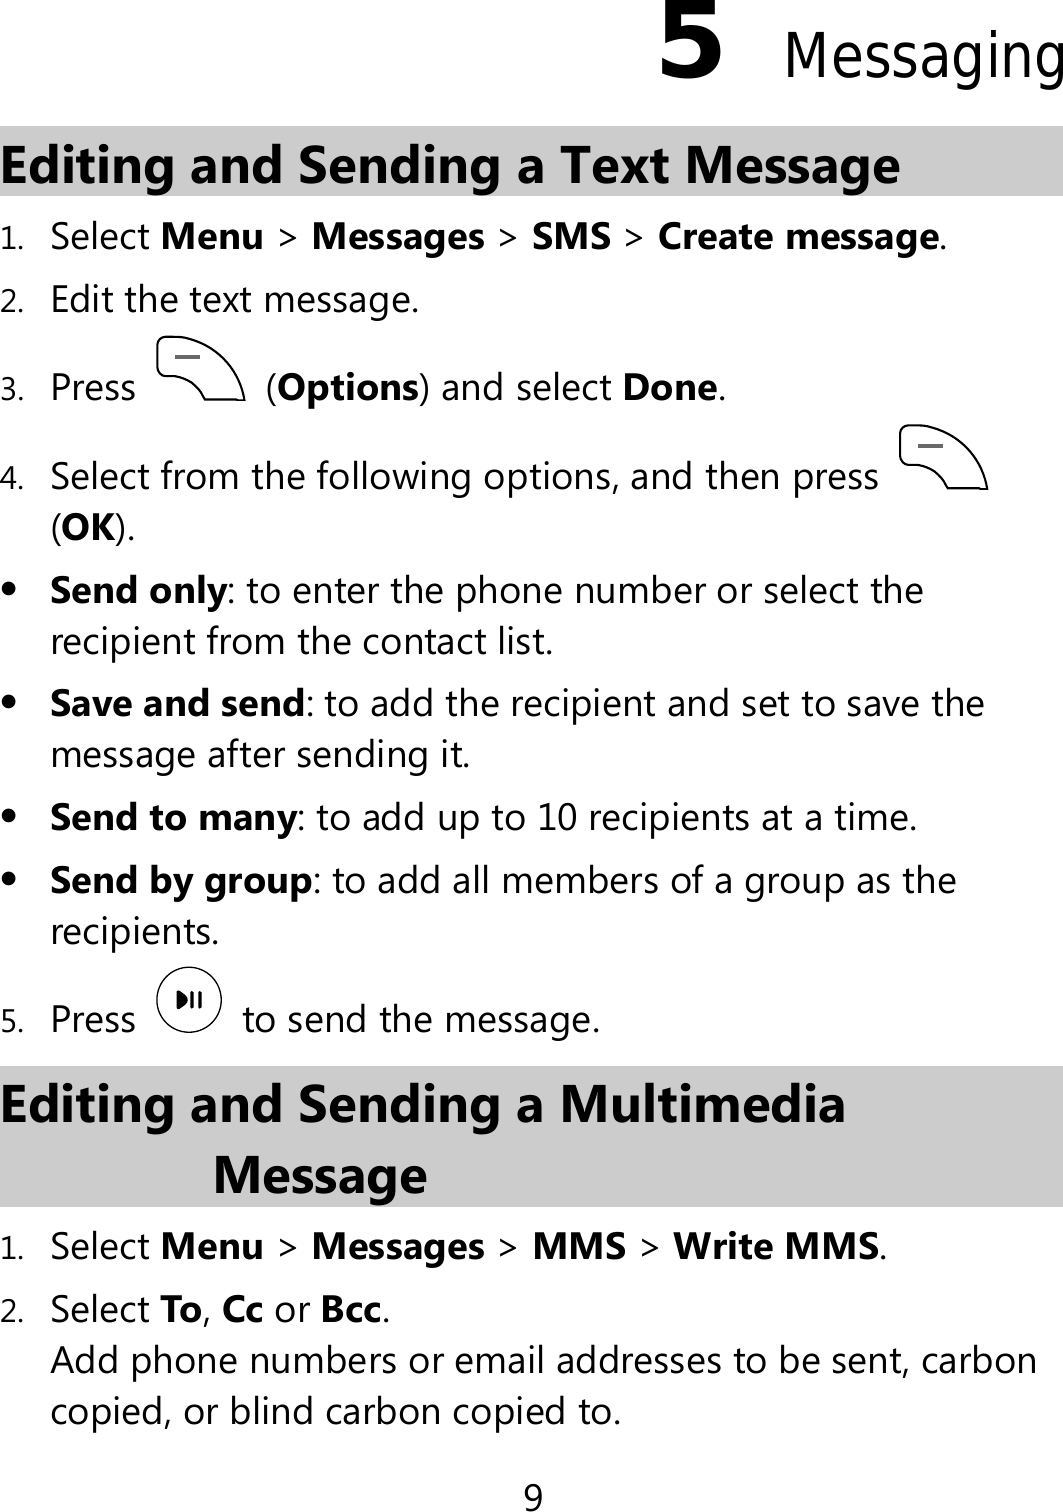 9 5  Messaging Editing and Sending a Text Message 1. Select Menu &gt; Messages &gt; SMS &gt; Create message. 2. Edit the text message. 3. Press   (Options) and select Done. 4. Select from the following options, and then press   (OK).  Send only: to enter the phone number or select the recipient from the contact list.  Save and send: to add the recipient and set to save the message after sending it.  Send to many: to add up to 10 recipients at a time.  Send by group: to add all members of a group as the recipients. 5. Press    to send the message. Editing and Sending a Multimedia Message 1. Select Menu &gt; Messages &gt; MMS &gt; Write MMS. 2. Select To, Cc or Bcc. Add phone numbers or email addresses to be sent, carbon copied, or blind carbon copied to. 